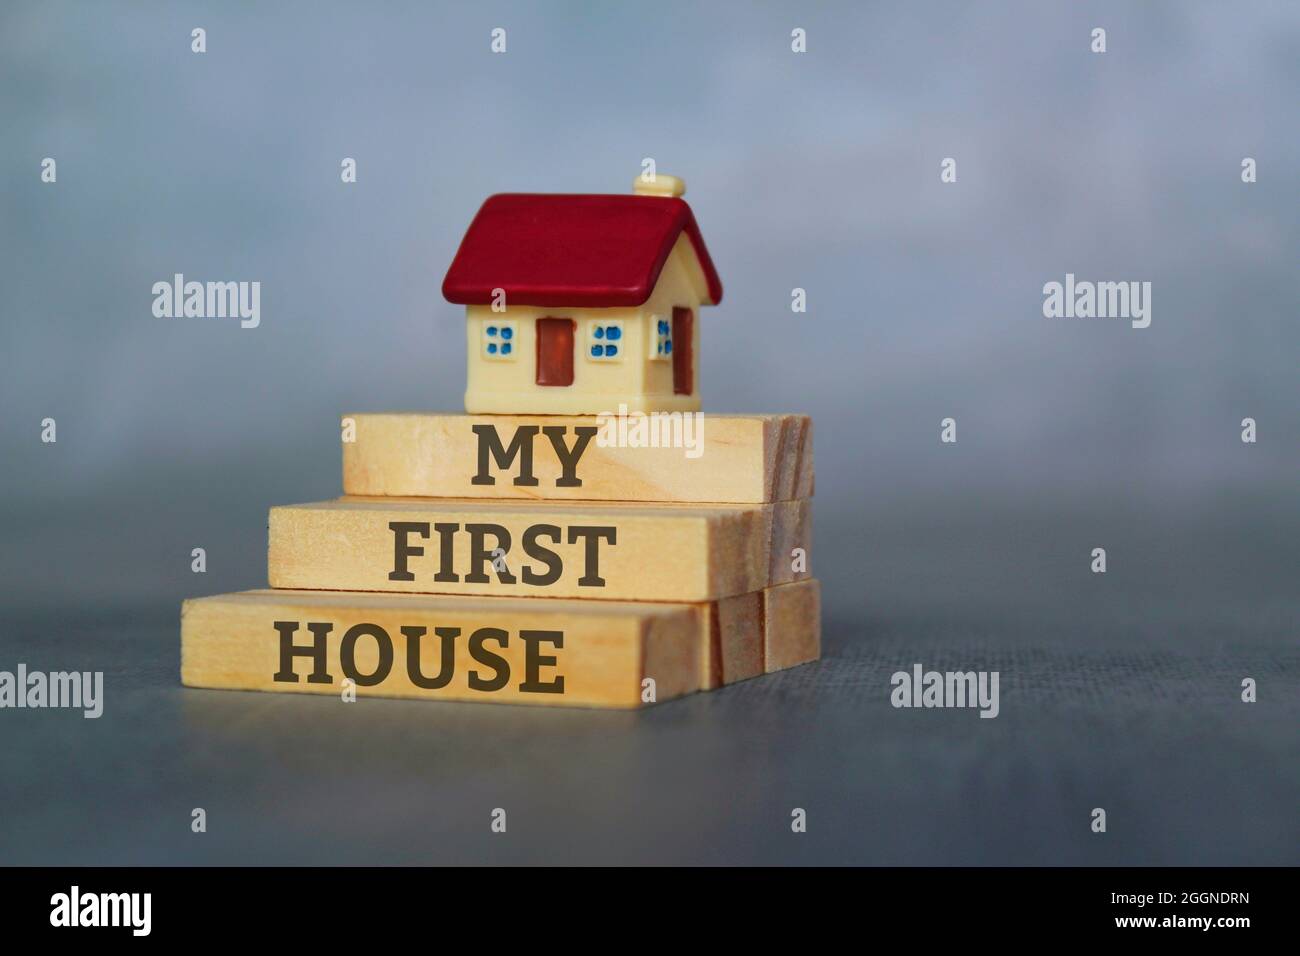 Miniature house on top of wooden tiles with text MY FIRST HOUSE Stock Photo